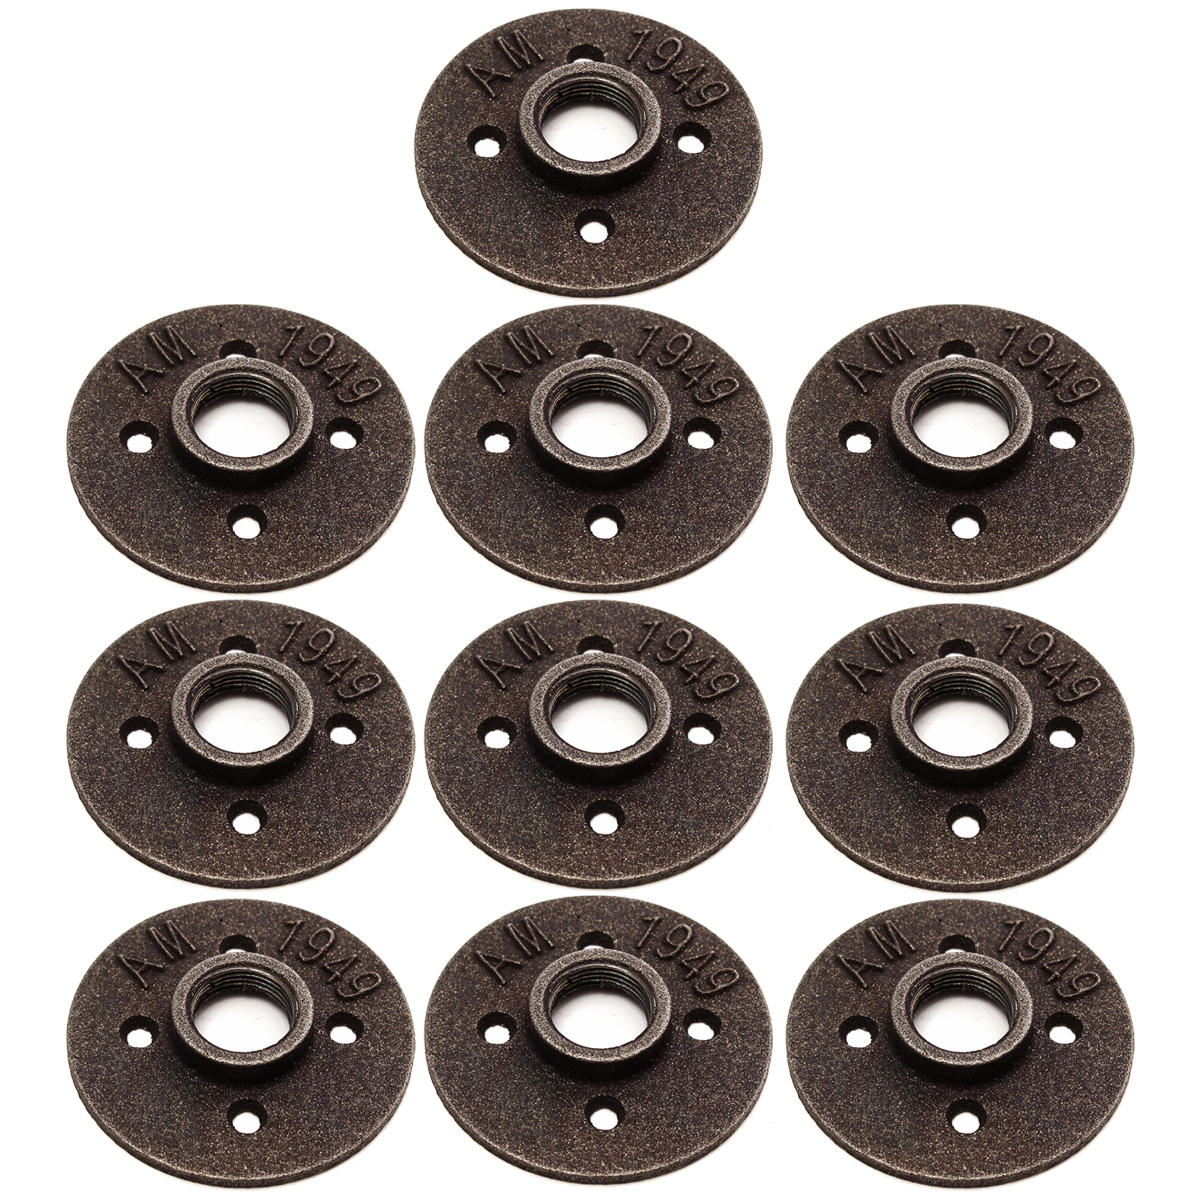 Image of 10pcs 3/4 Inch Black Malleable Iron Floor Flange Fitting Pipe NPT Antique Wall Flange Seat